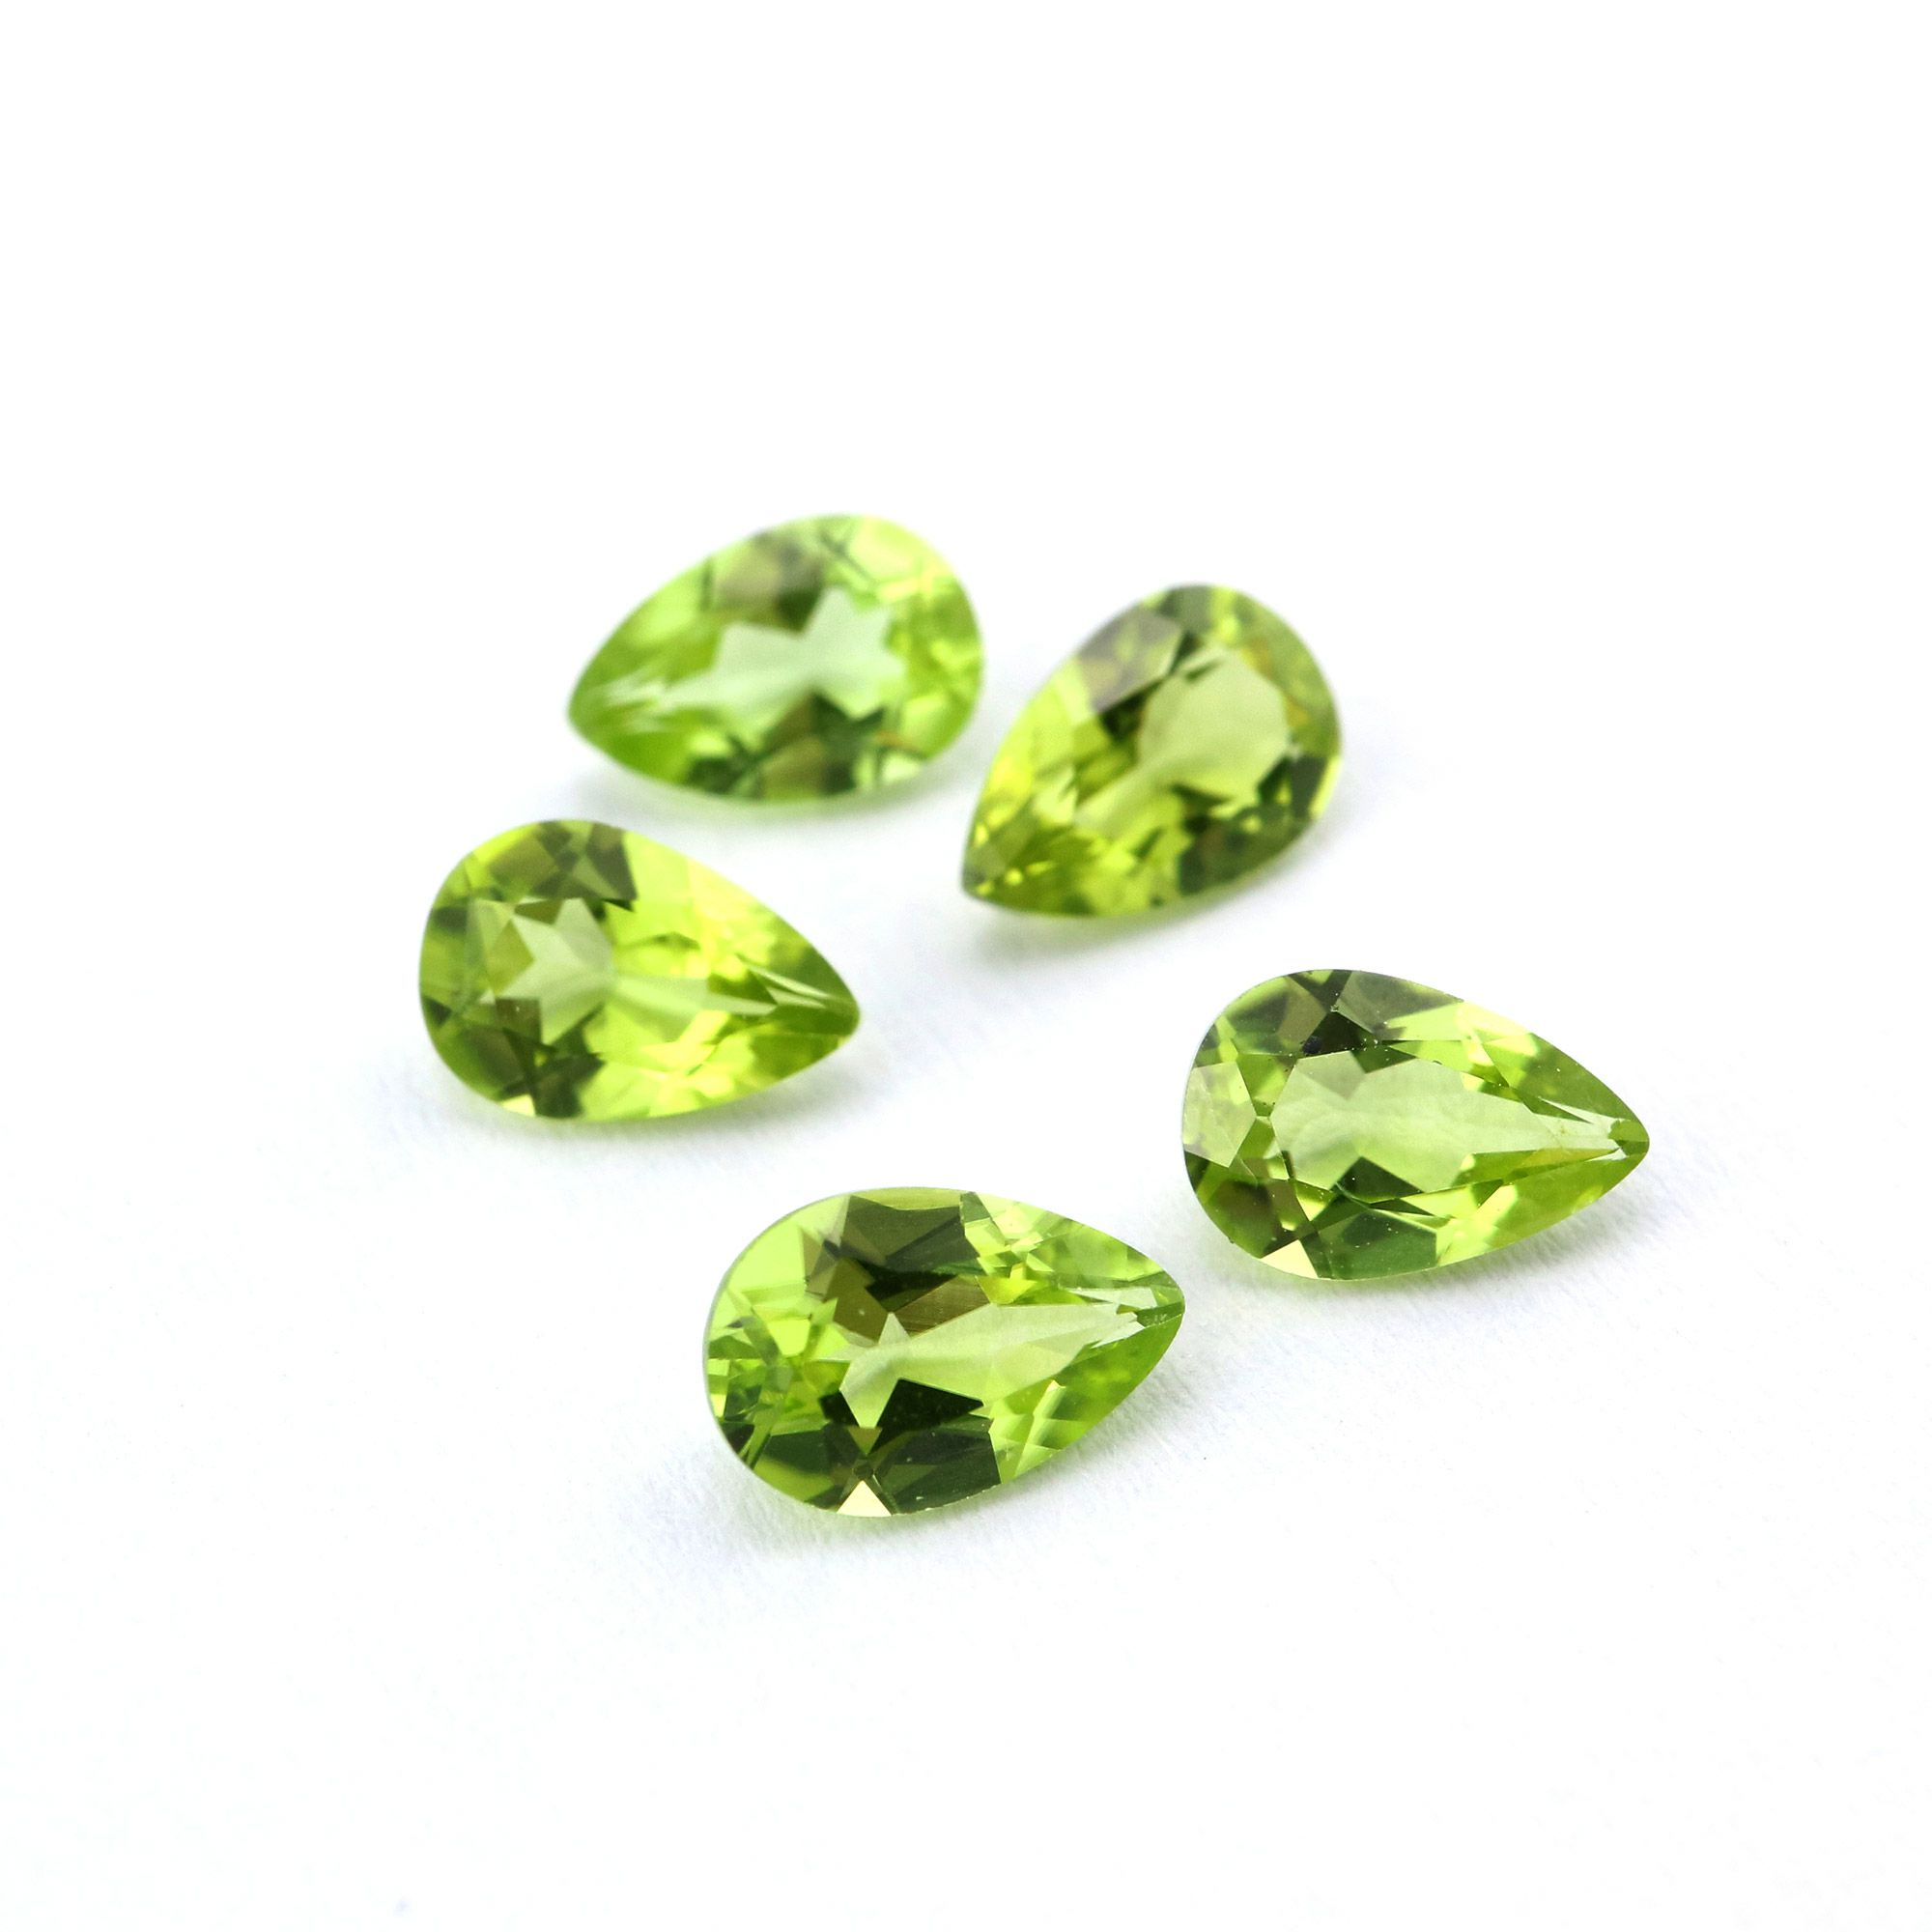 5Pcs Pear Green Peridot August Birthstone Faceted Cut Loose Gemstone Natural Semi Precious Stone DIY Jewelry Supplies 4150006 - Click Image to Close